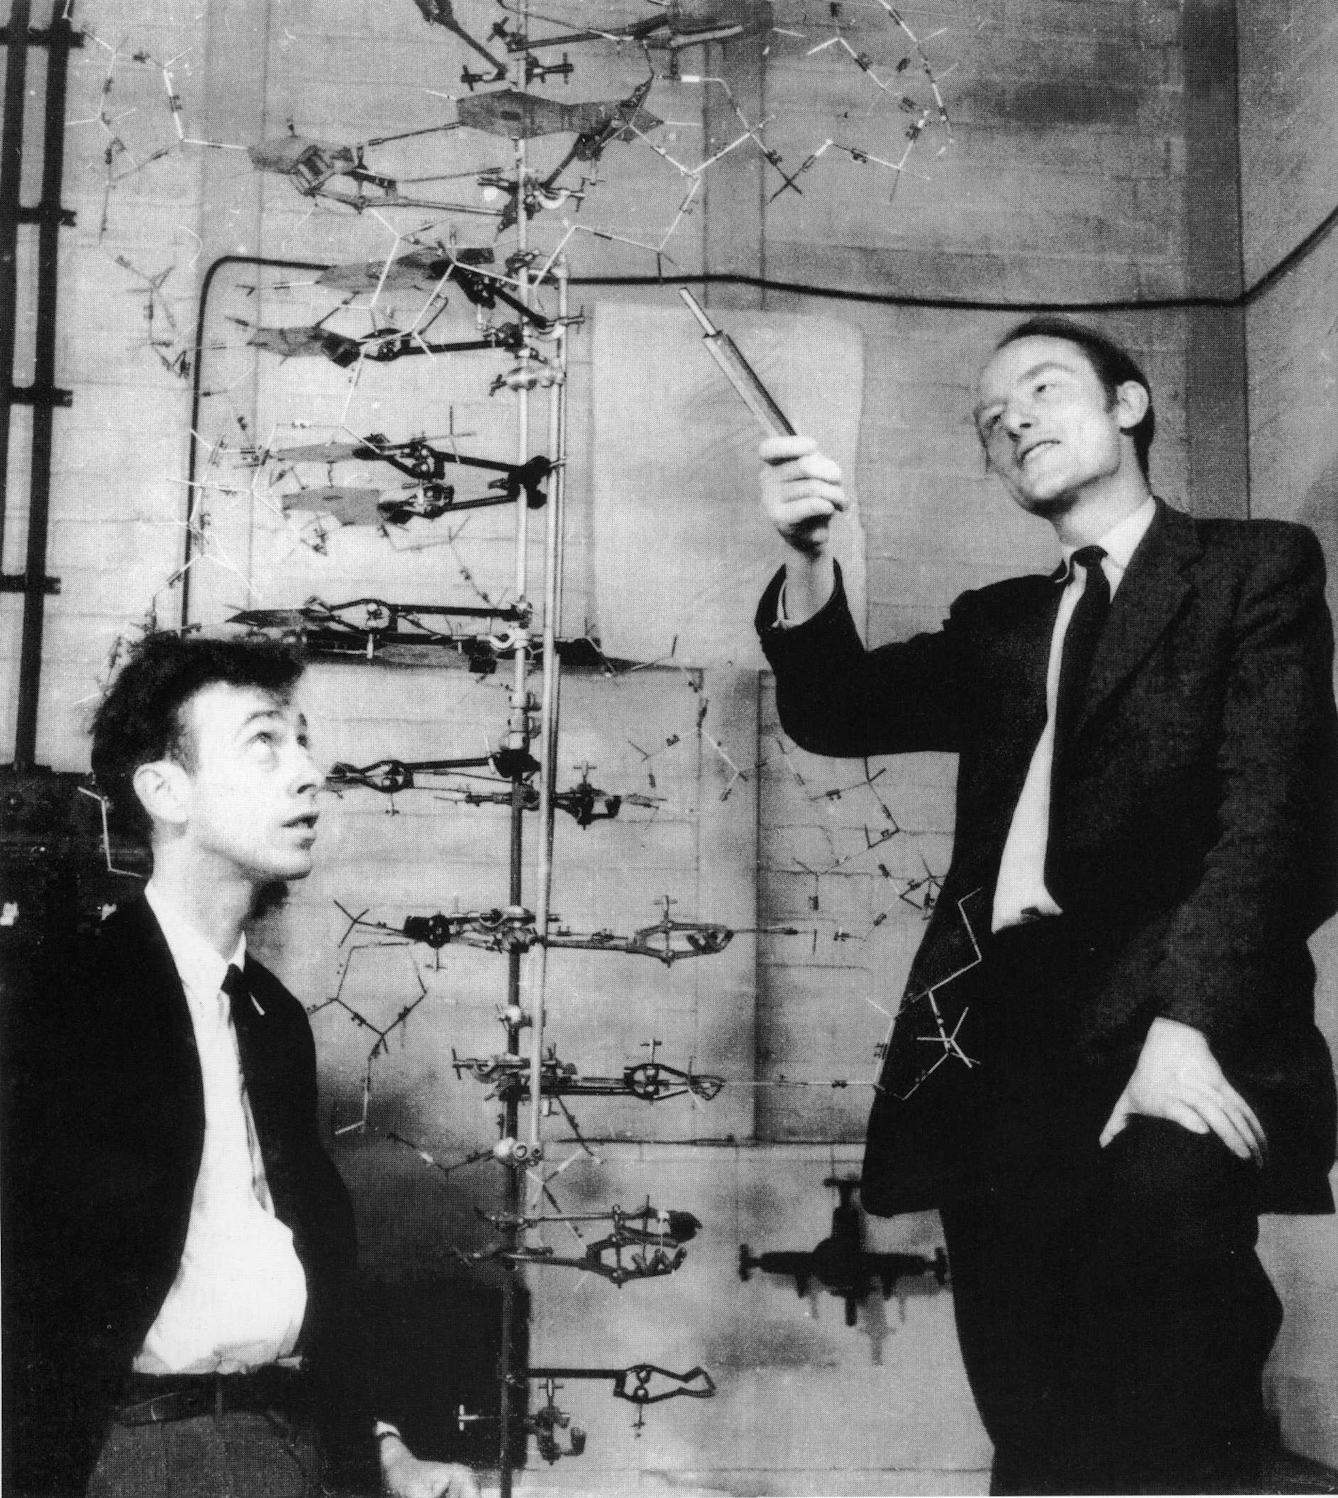 Photograph showing two men in suits and ties, looking at a stick-and-ball model of DNA. The older man, to the right, points at it with a stick. The younger man, on the left, looks upward at the model and his colleague.